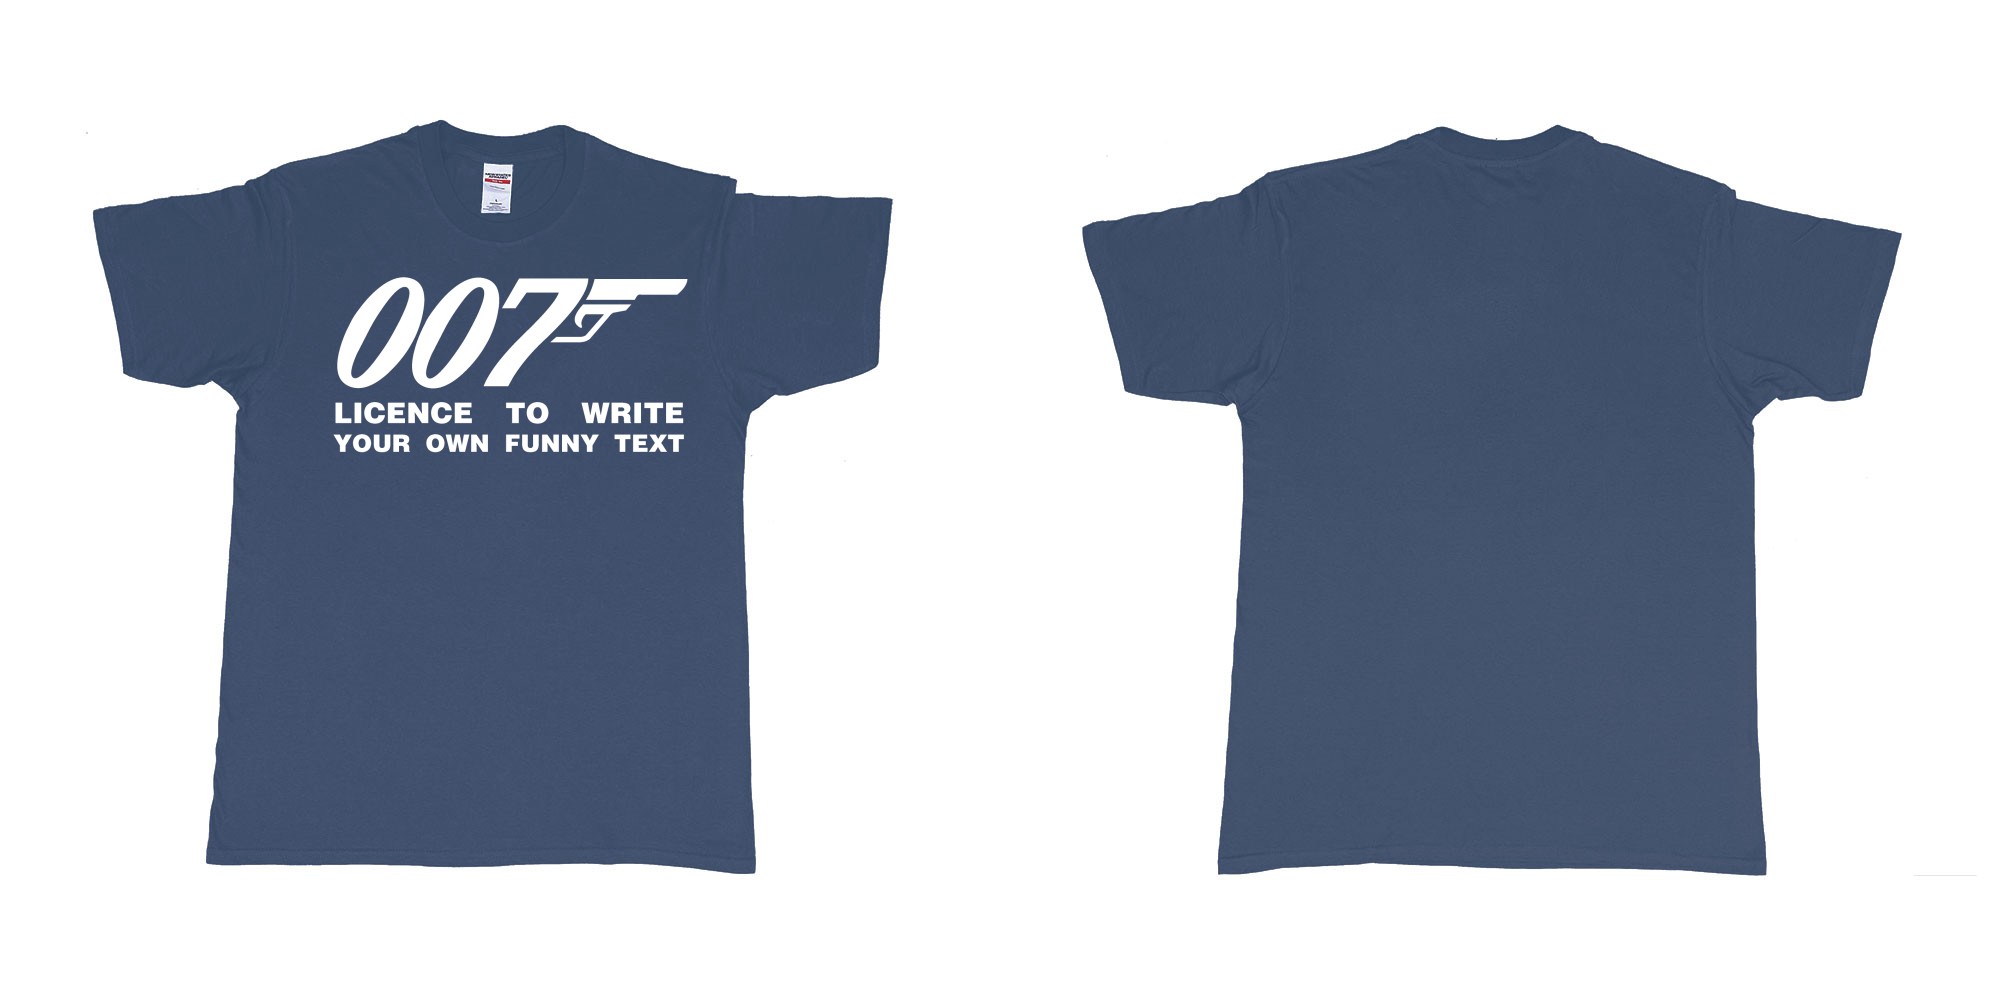 Custom tshirt design james bond logo licence to write own custom text print in fabric color navy choice your own text made in Bali by The Pirate Way